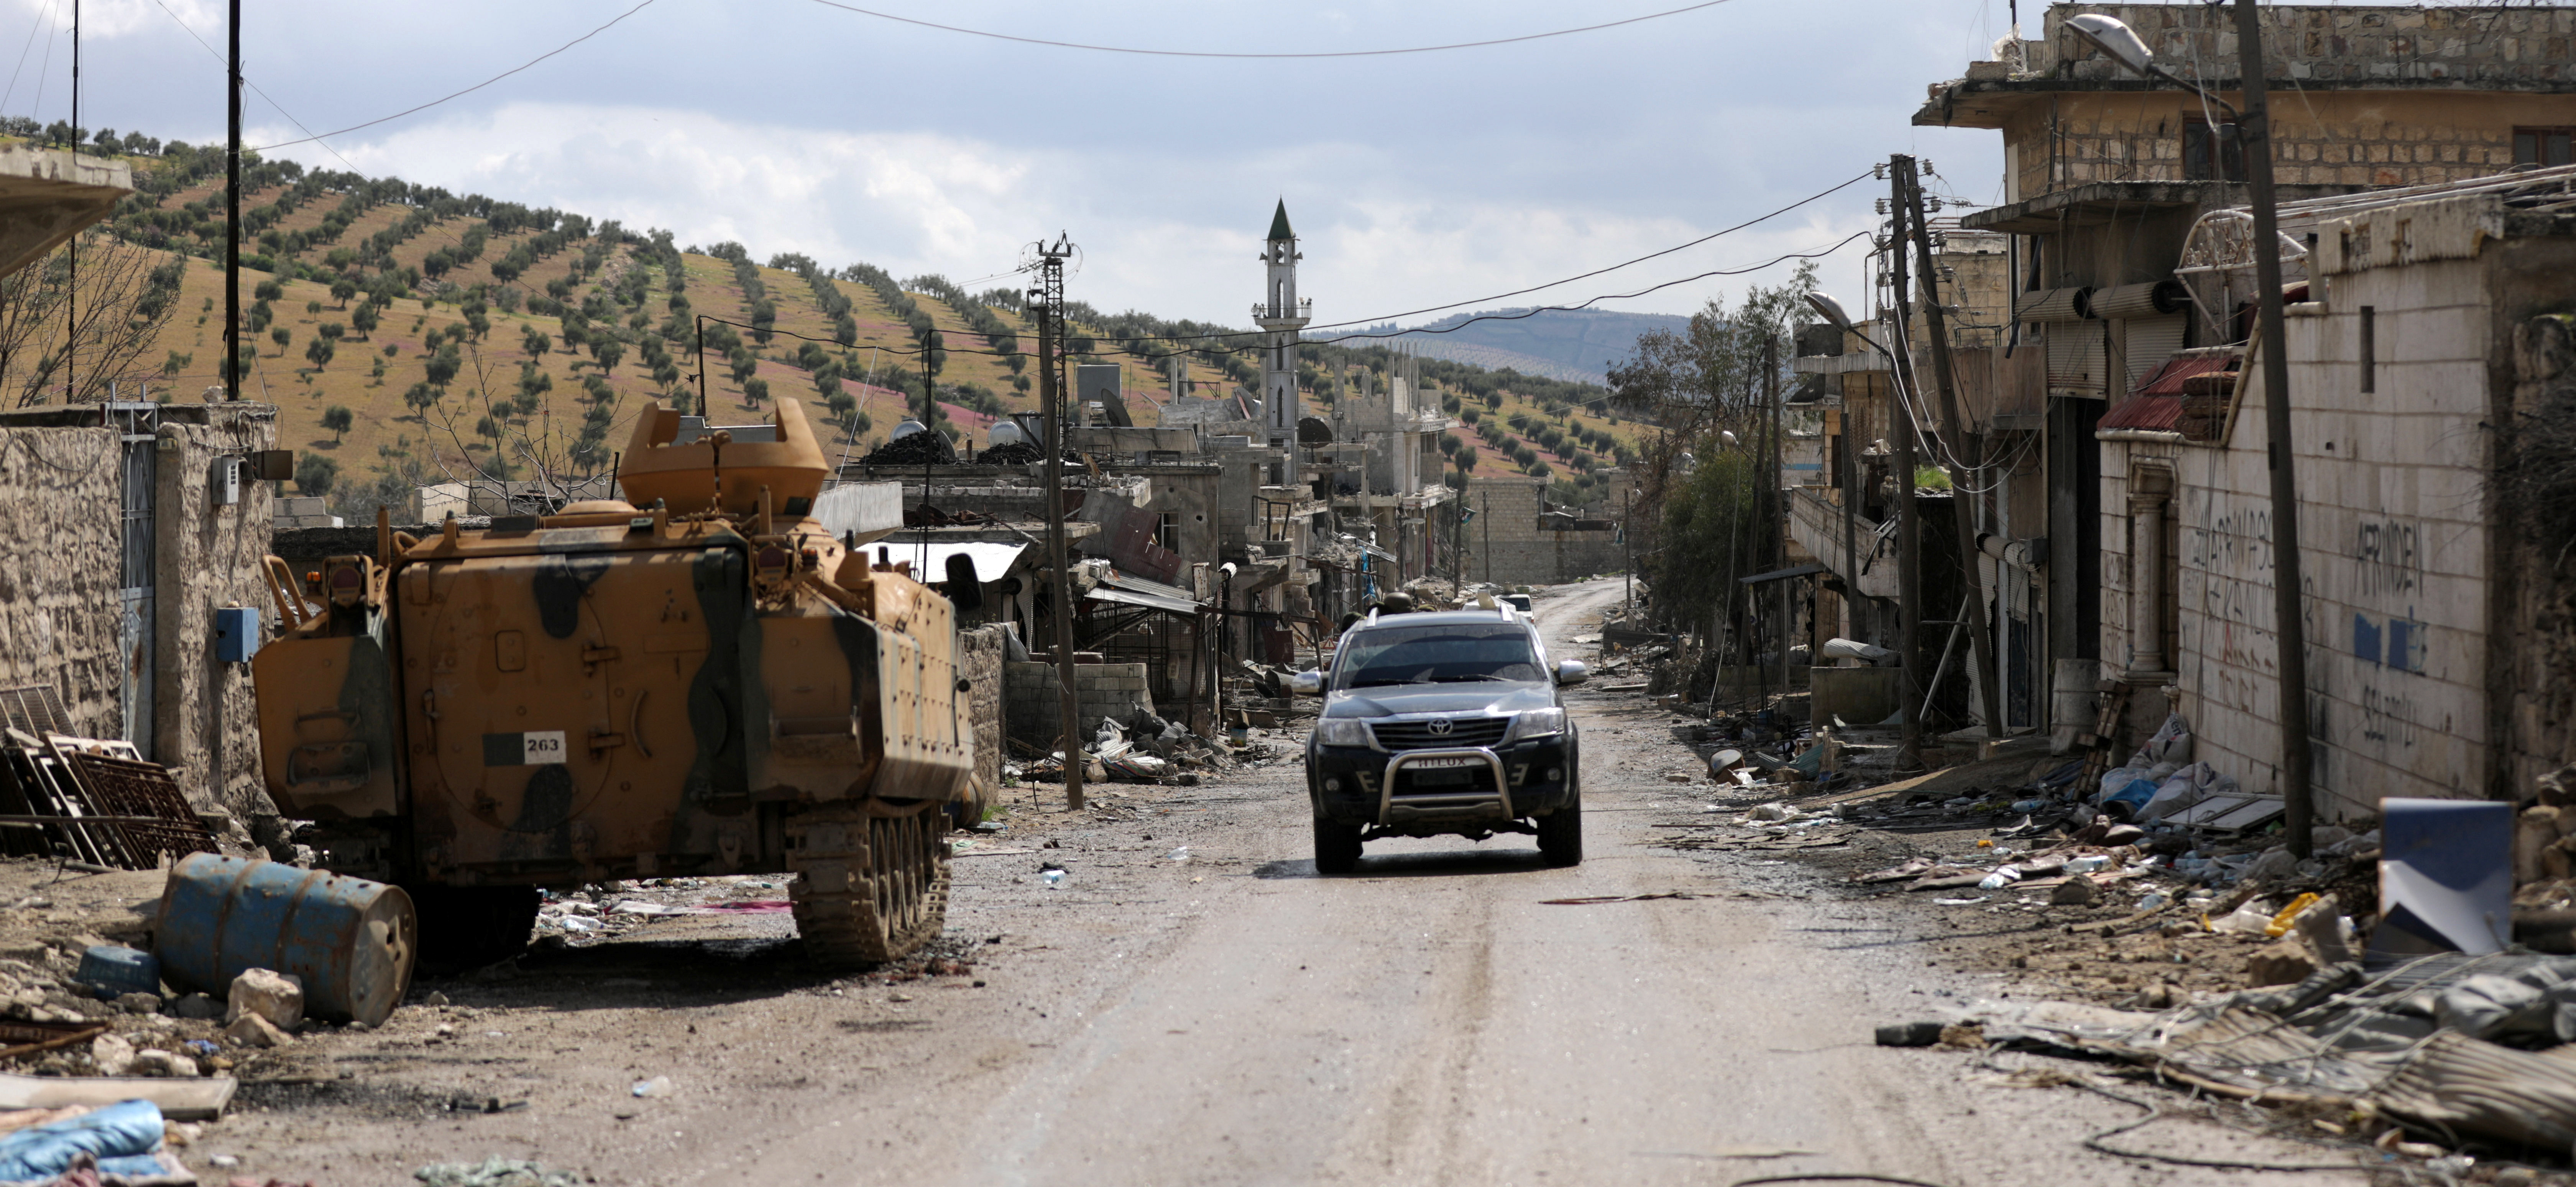 A miltary vehicle is seen in the north east of Afrin